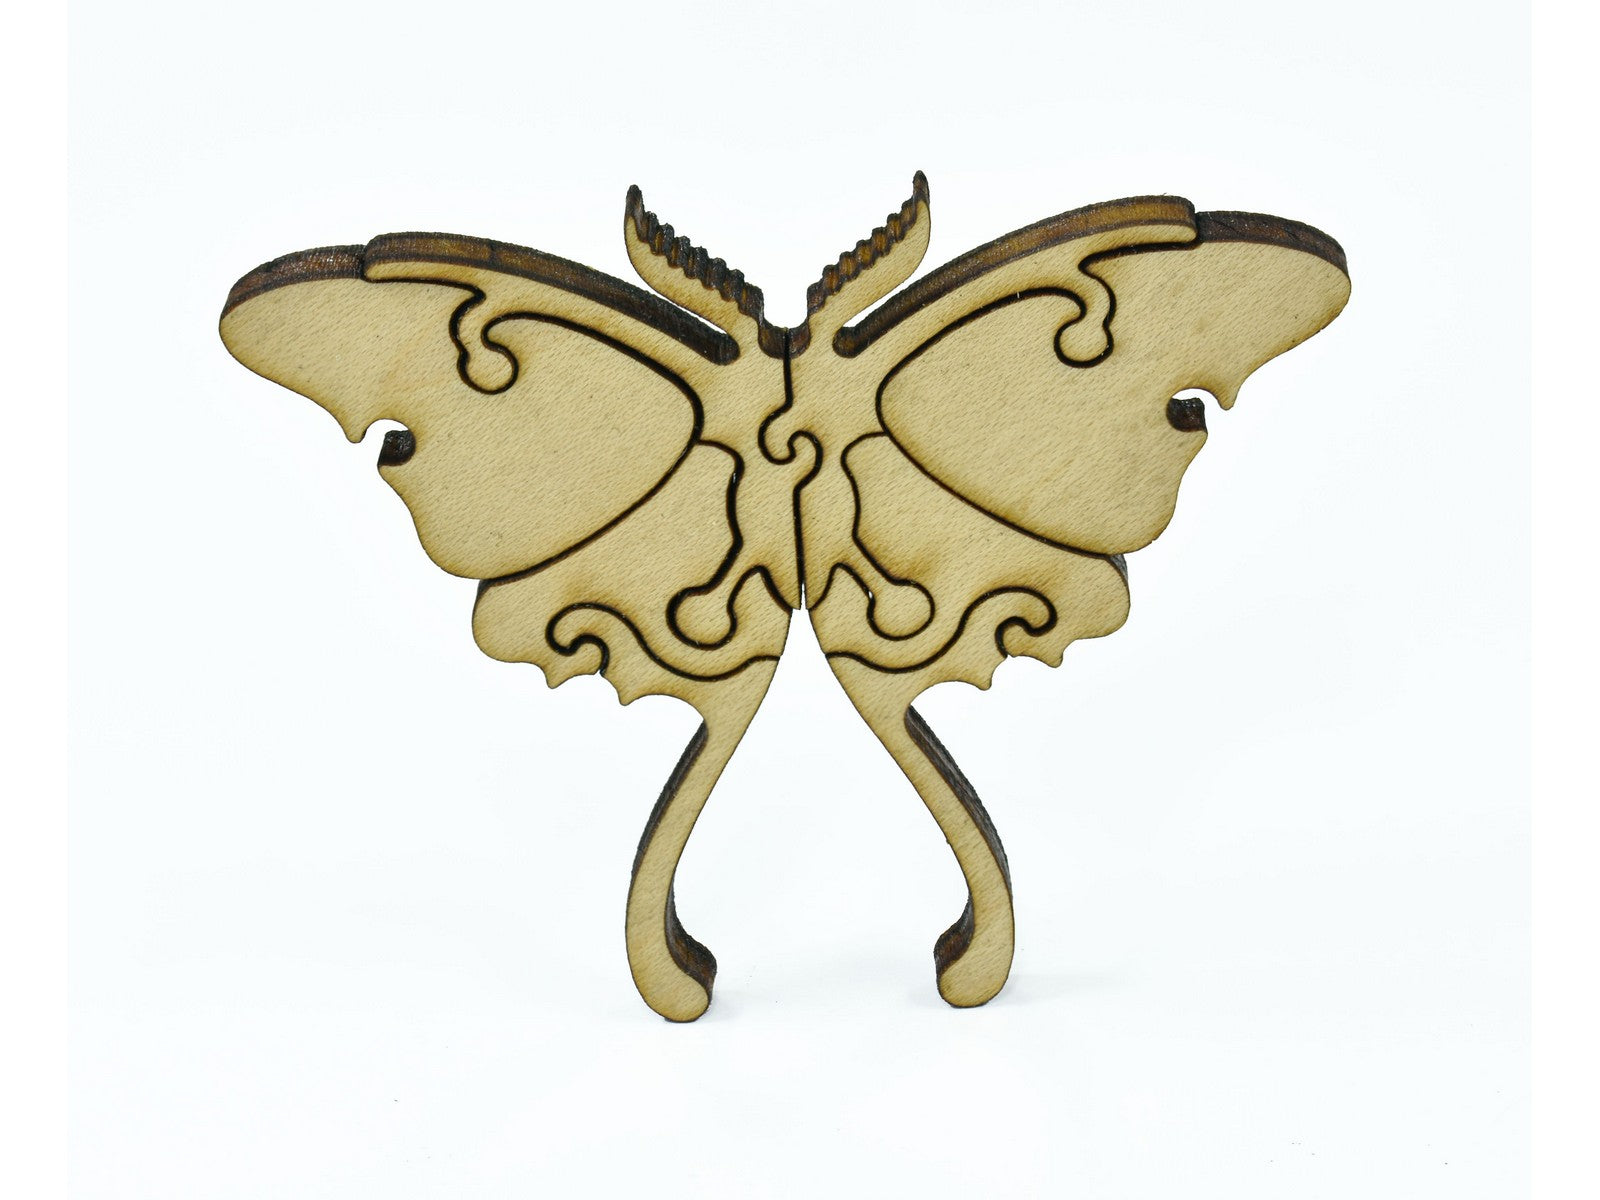 A closeup of pieces in the shape of luna moth.